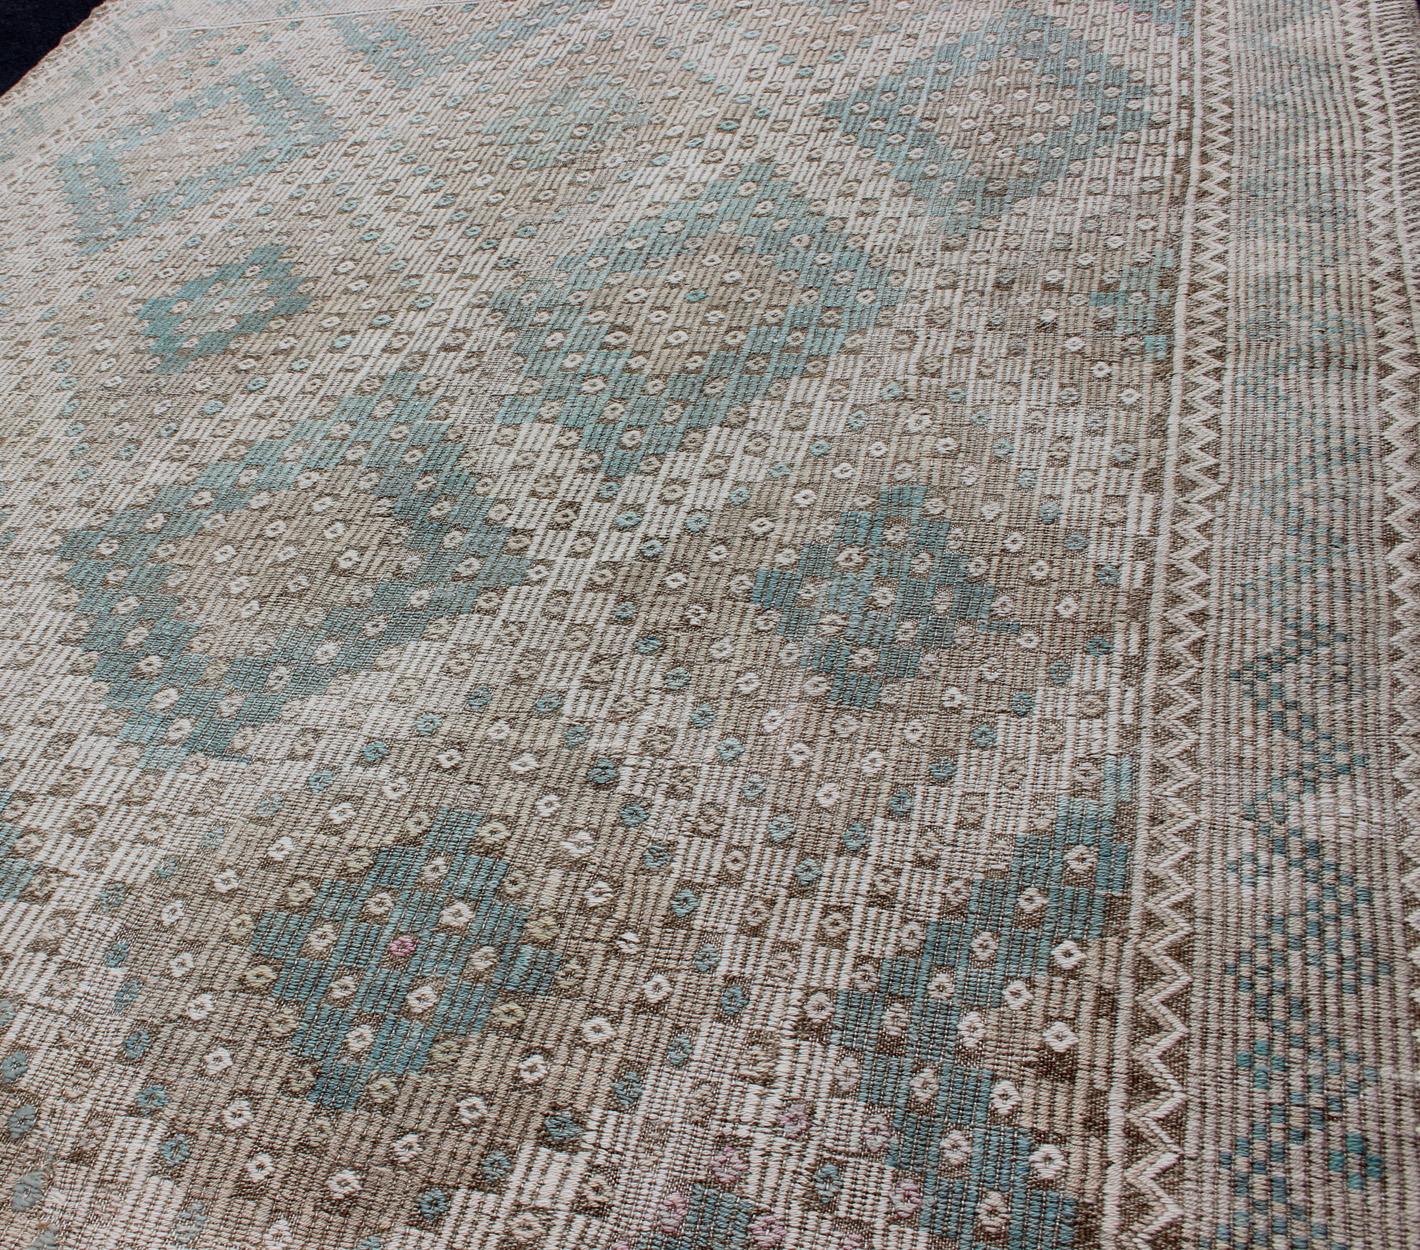 20th Century Diamond Design Vintage Turkish Embroidered Kilim in Light Teal blue, Tan, Brown For Sale